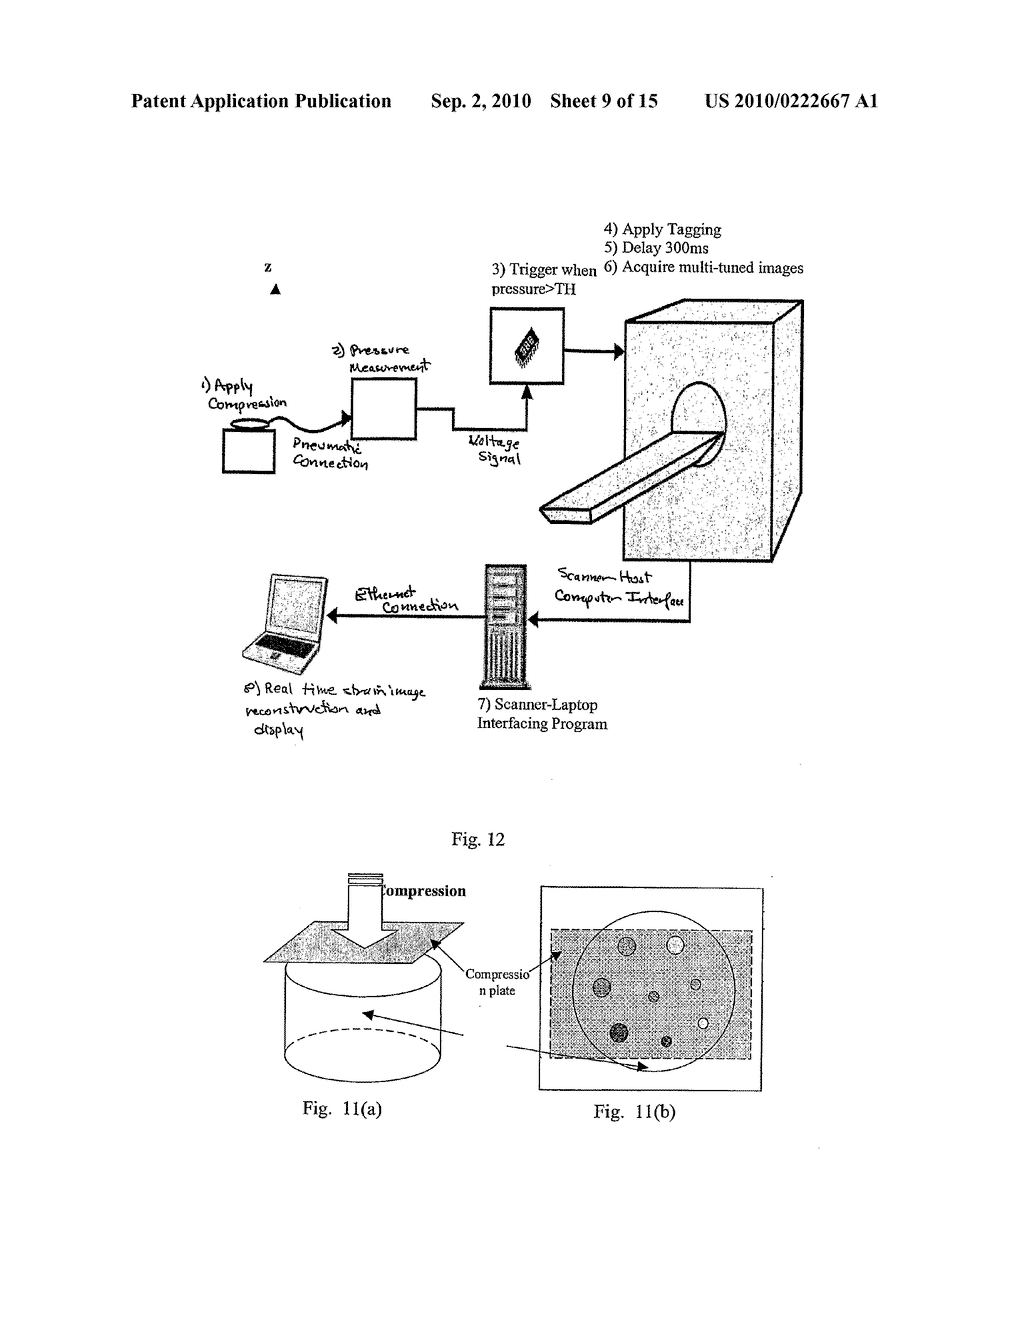 COMPRESSION DEVICE FOR ENHANCING NORMAL/ABNORMAL TISSUE CONTRAST IN MRI INCLUDING DEVICES AND METHODS RELATED THERETO - diagram, schematic, and image 10